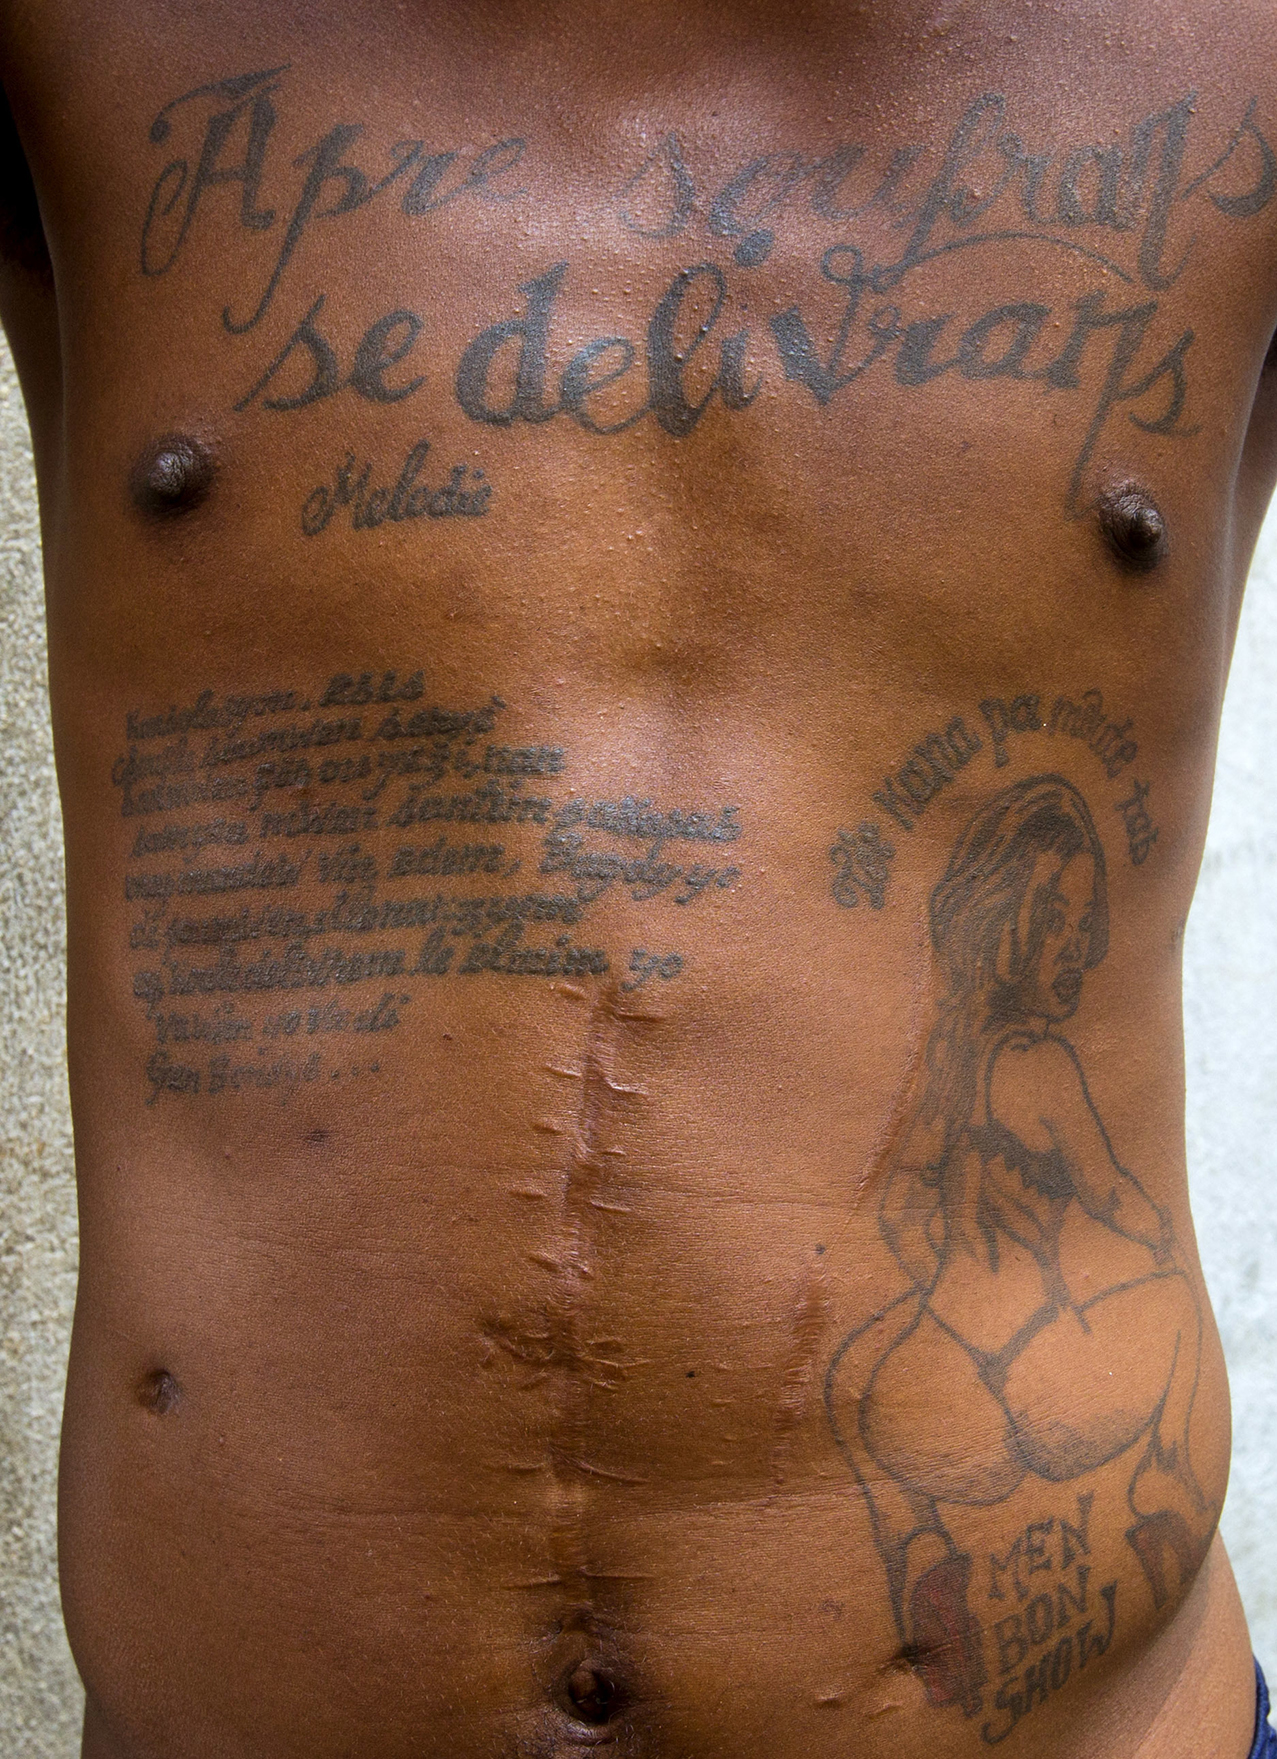 This Feb. 13, 2017 photo shows the tattoos on the chest and abdomen of a prisoner incarcerated at the National Penitentiary in downtown Port-au-Prince, Haiti. The tattoo on his chest reads in Haitian Creole: "After suffering is deliverance." ( AP Photo/Dieu Nalio Chery)